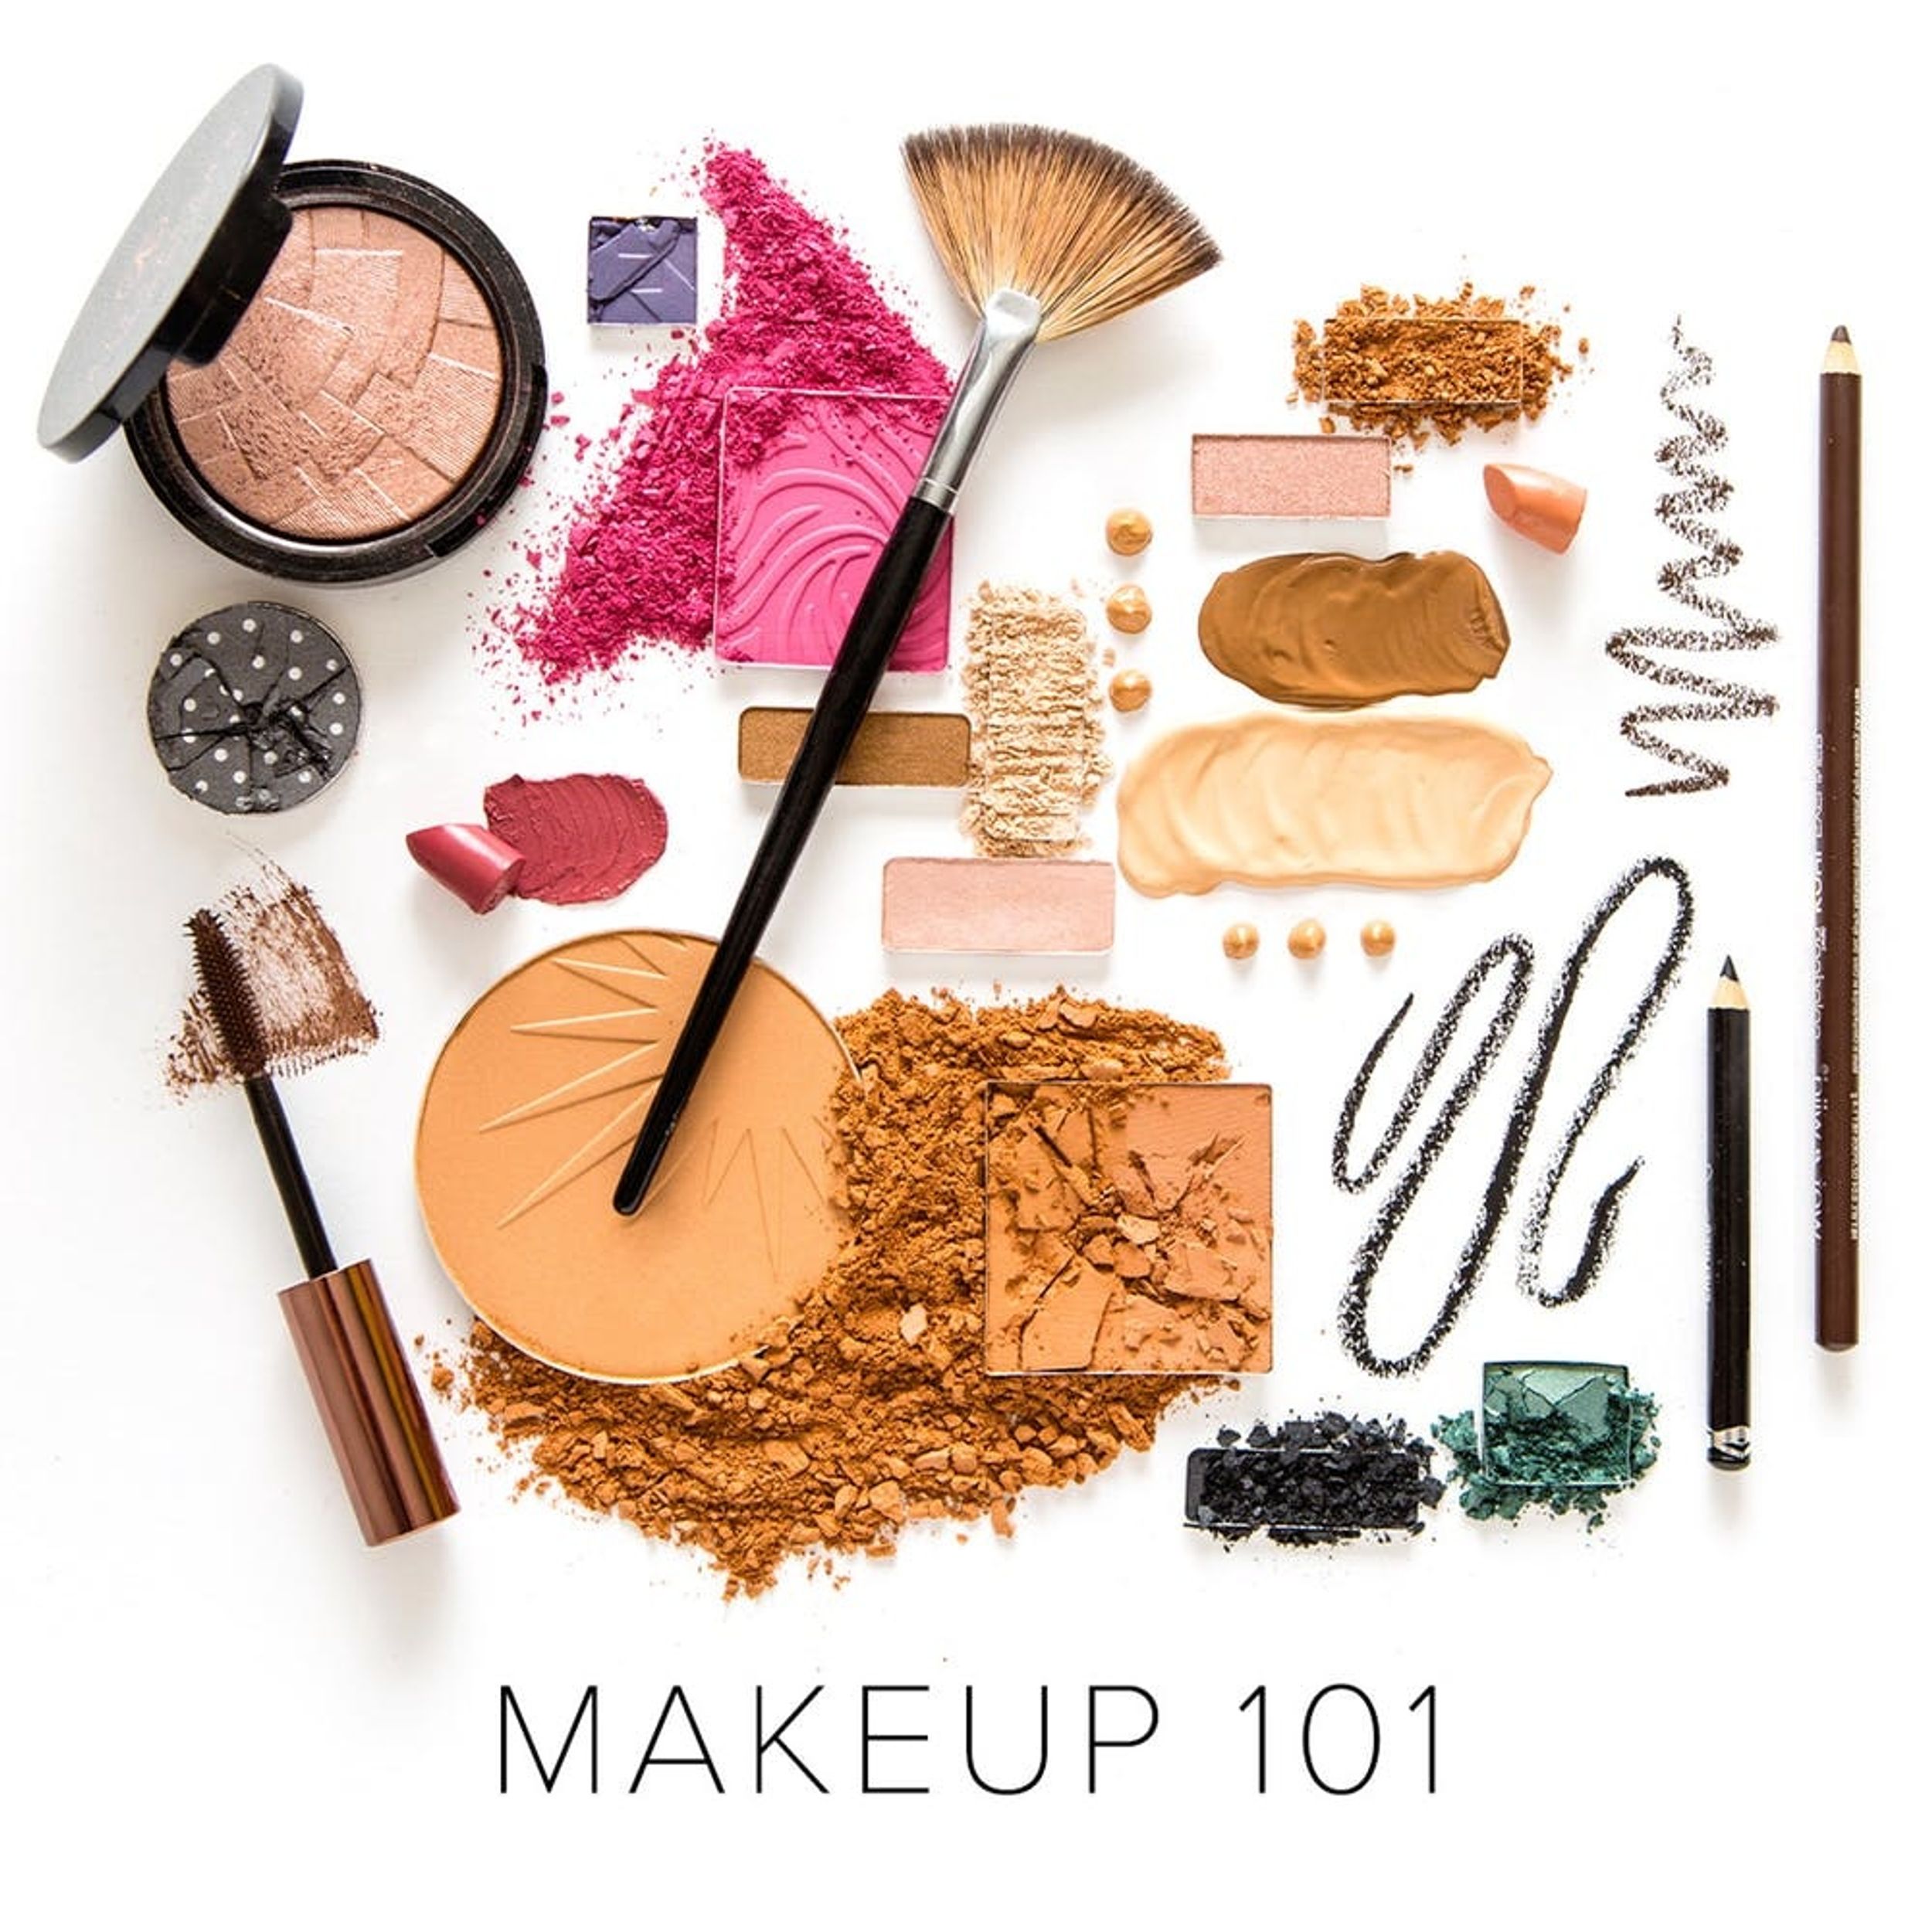 Makeup 101: Your Crash Course on the Essentials + How to Use Them